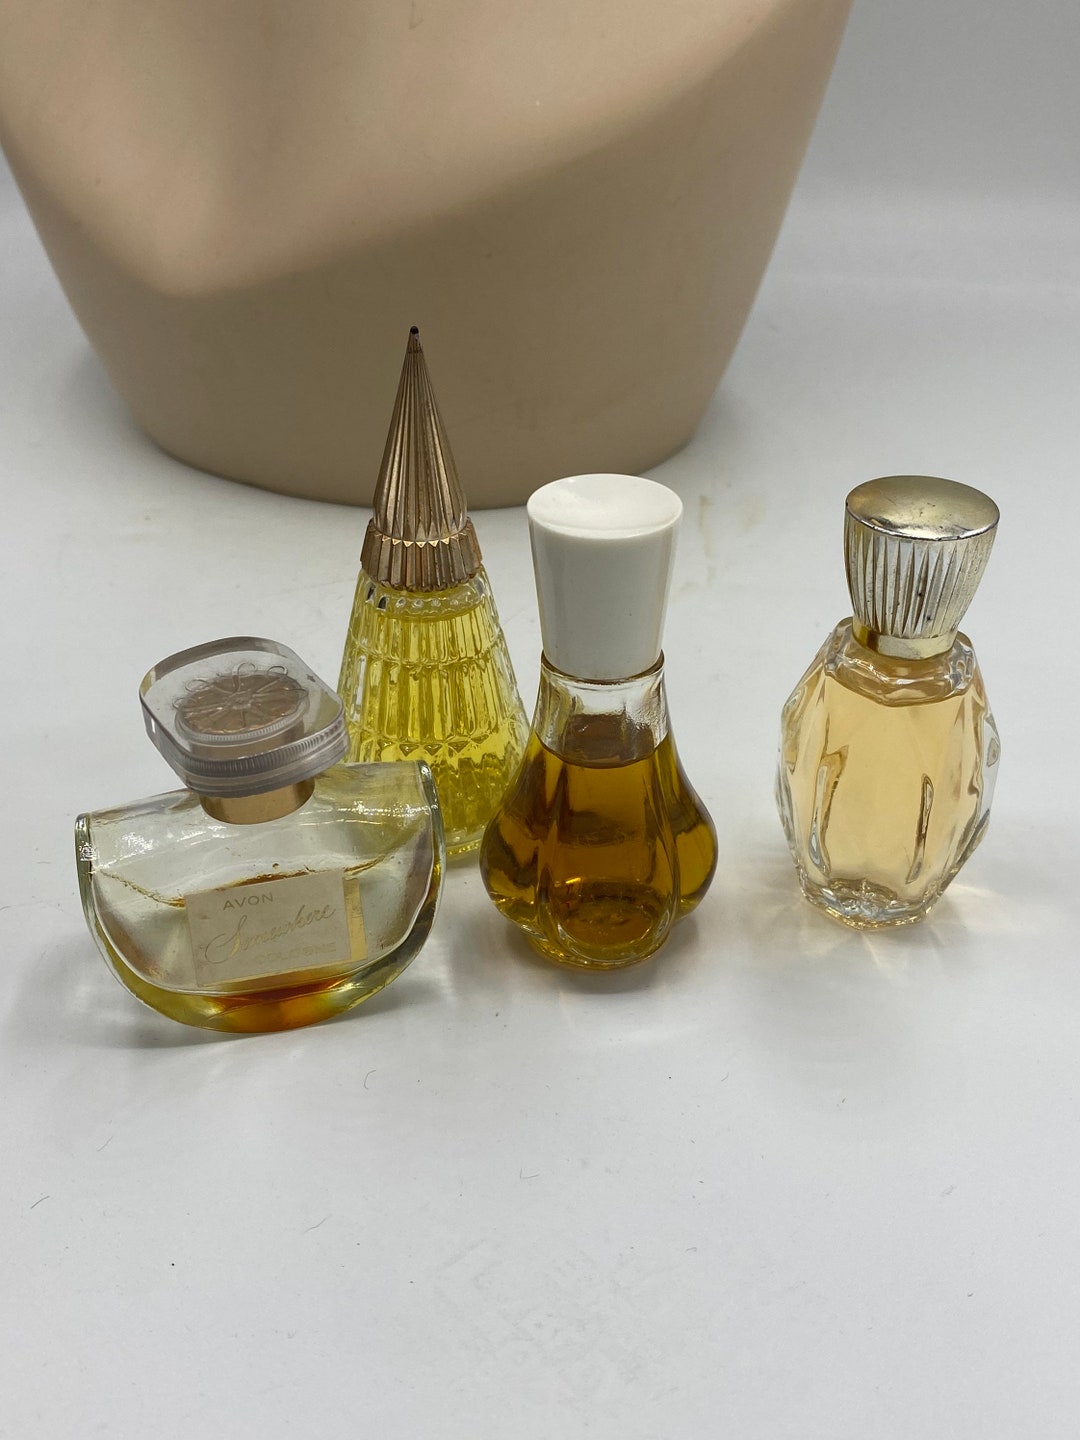 Vintage 1960s 1970s Avon Perfumes All Pictured 